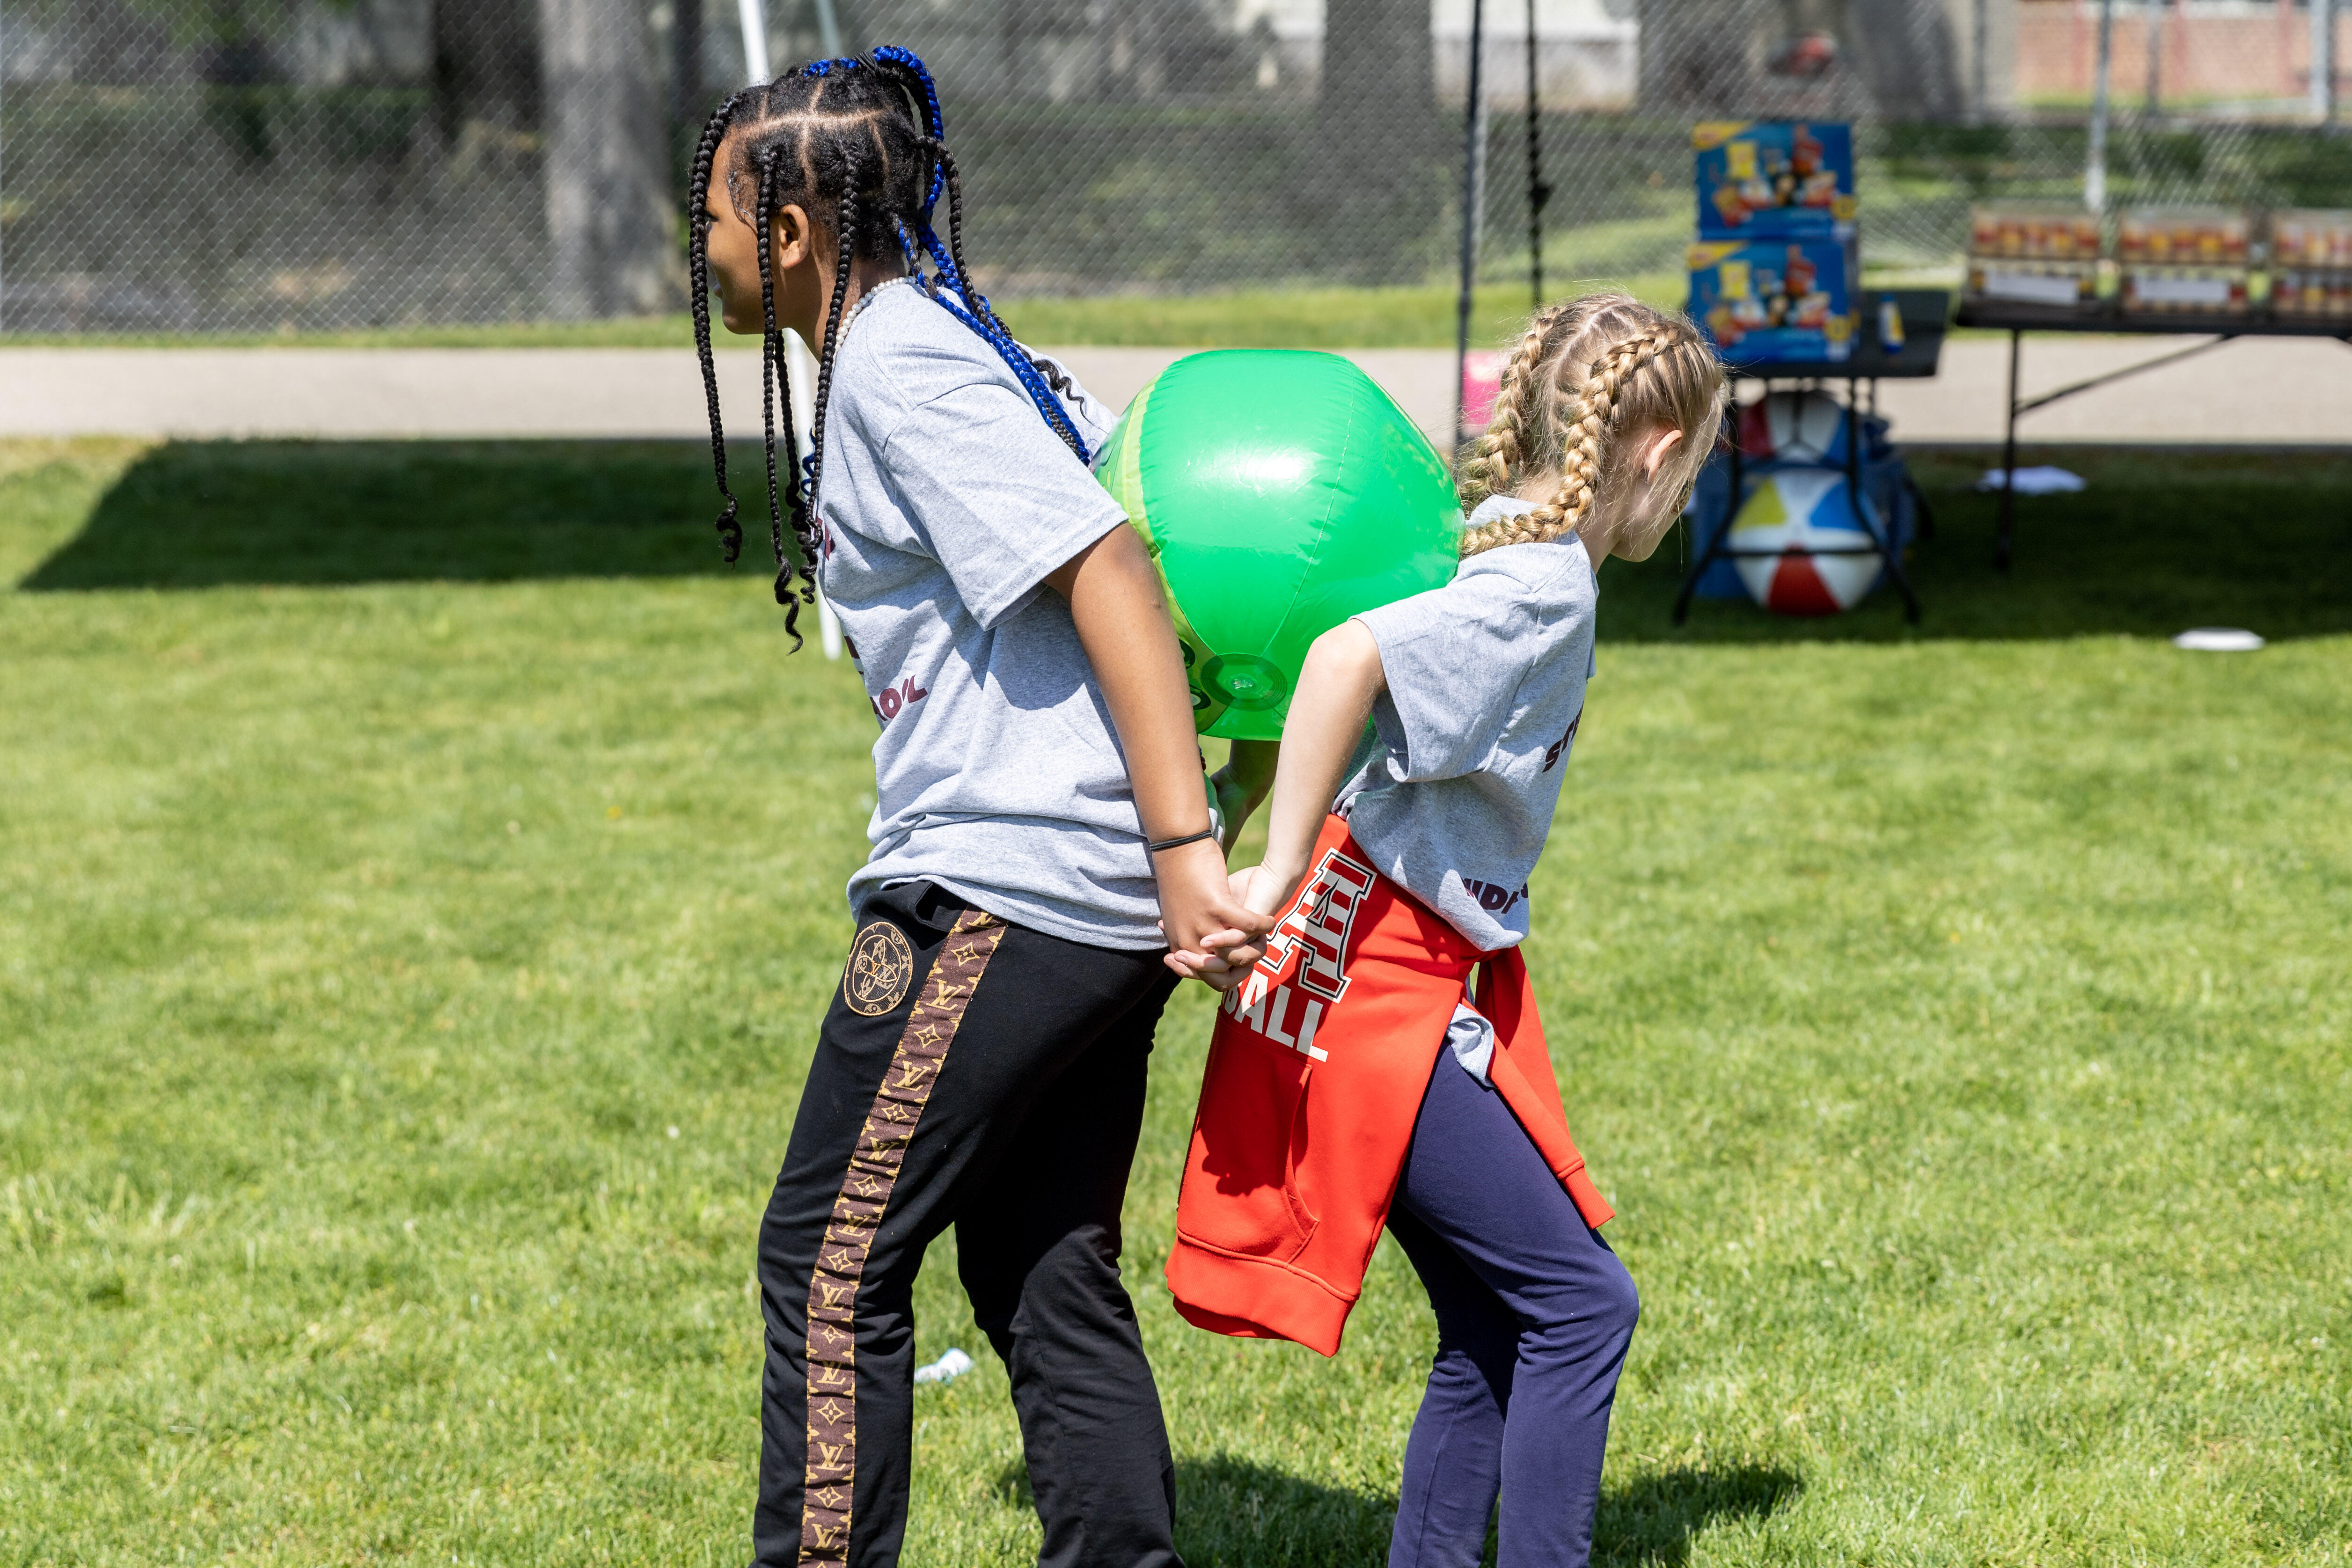 Two students work together to support an inflated ball pinned between their backs